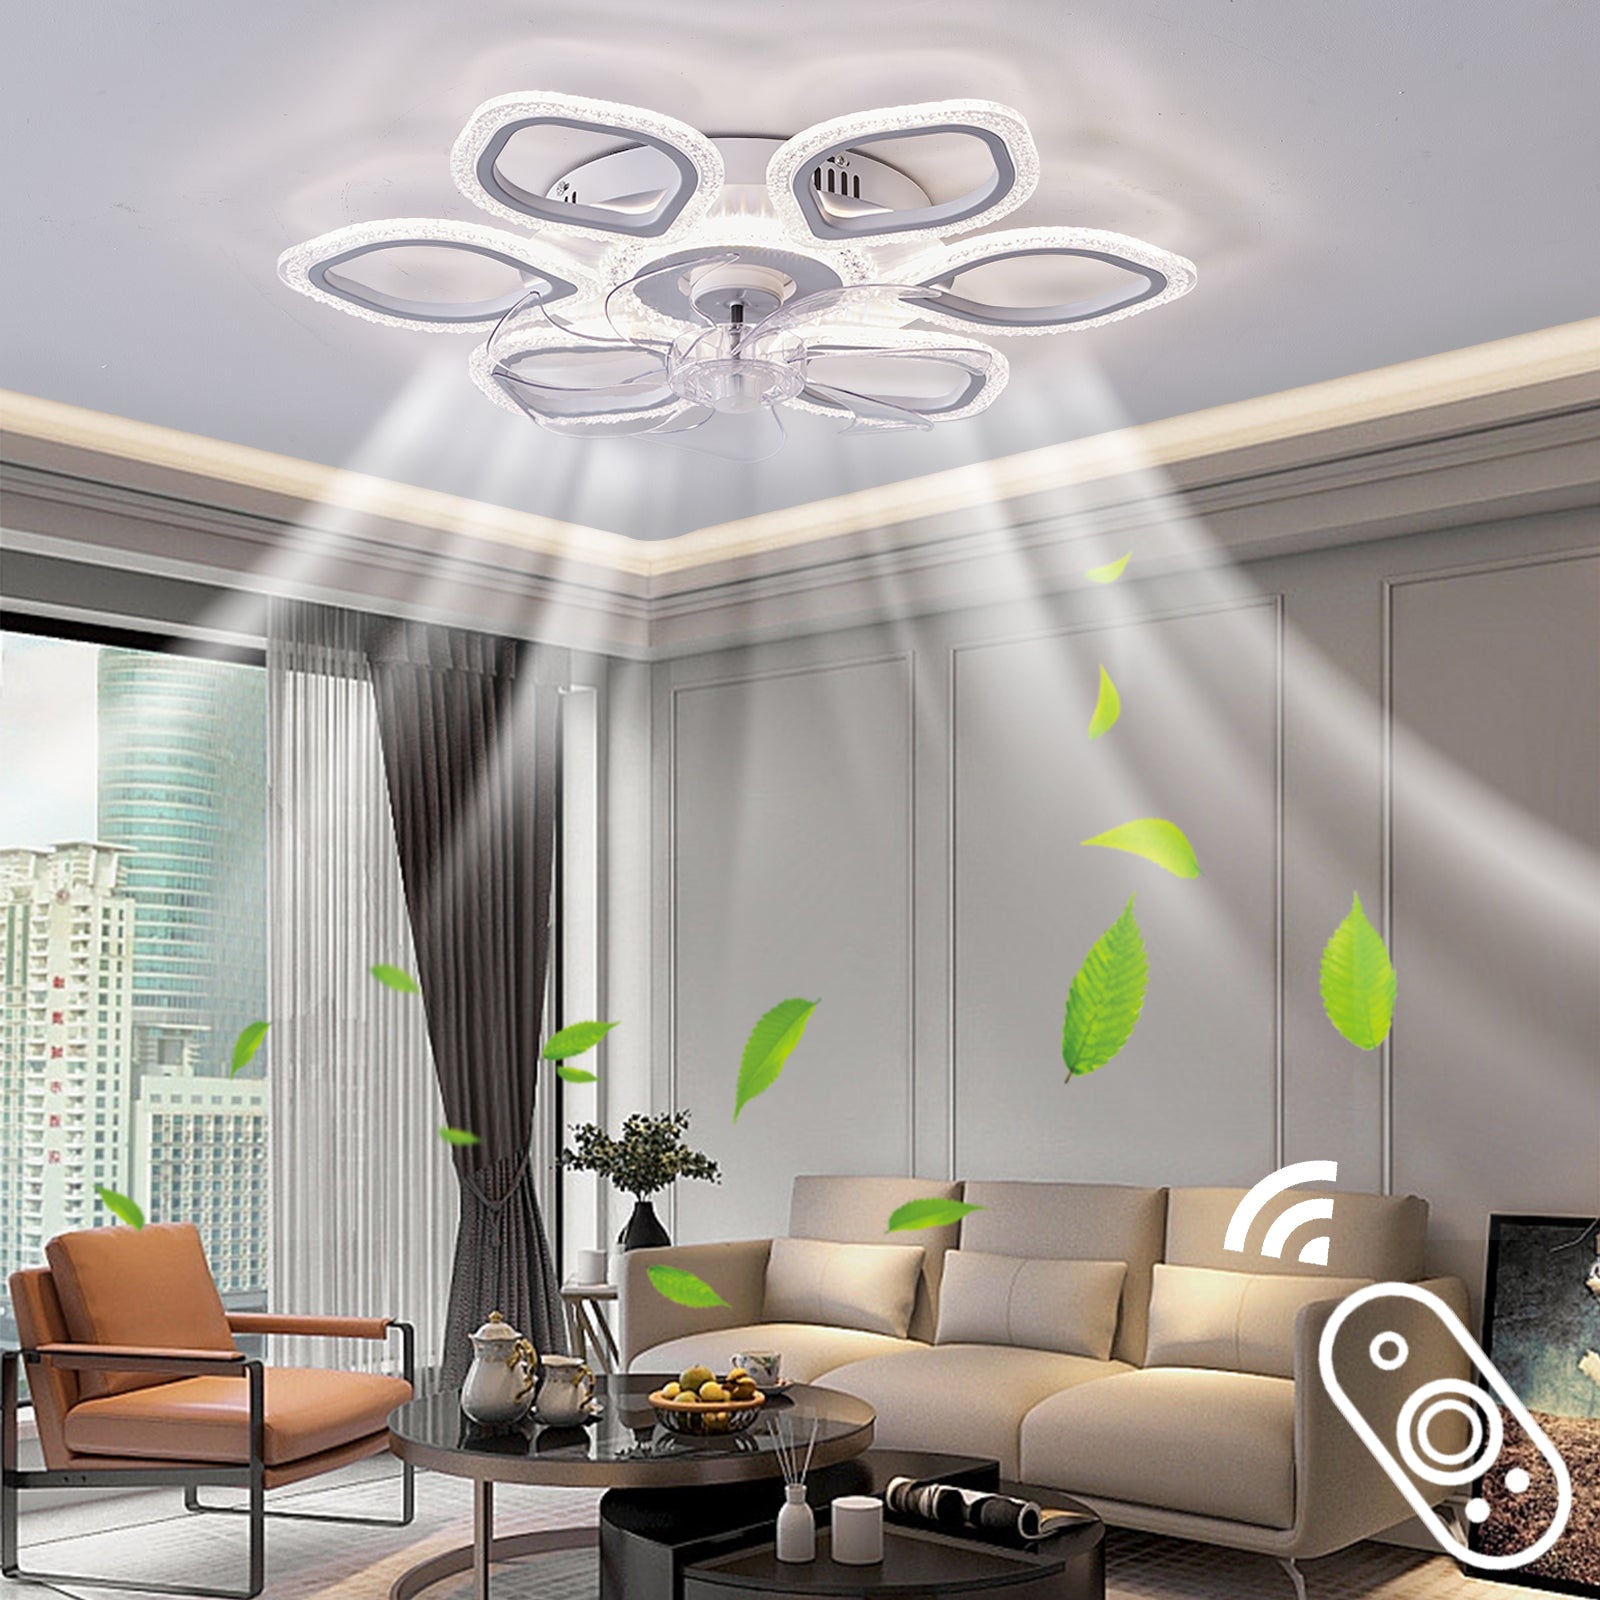 REYDELUZ 25.6'' Ceiling Fan with Light and Remote Control to Adjust Three Colors of Lights and Six-Speed Wind Speed is White Flower-Shaped and Suitable for Bedroom and Dining Room